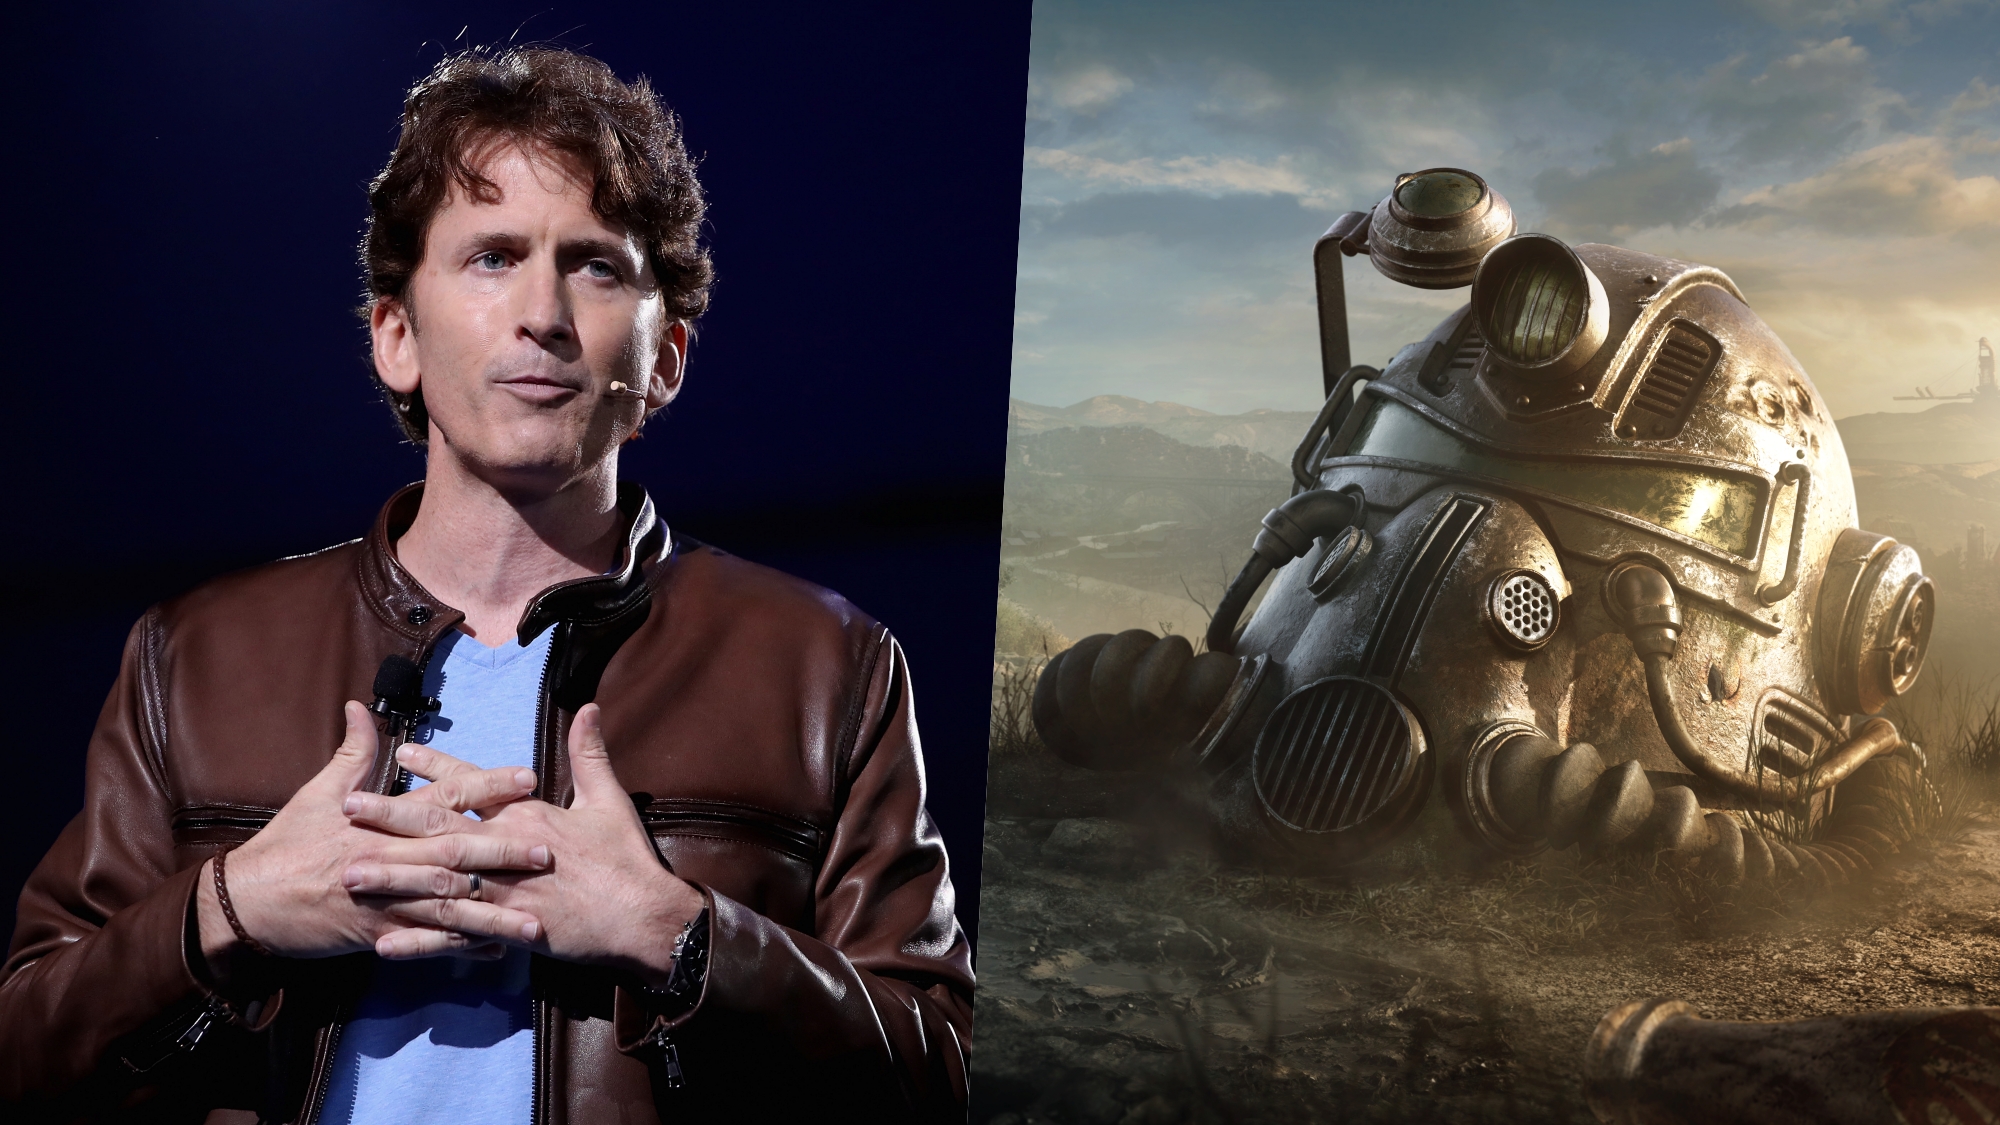 The Elder Scrolls 6 Is In Pre-Production, Todd Howard Confirms